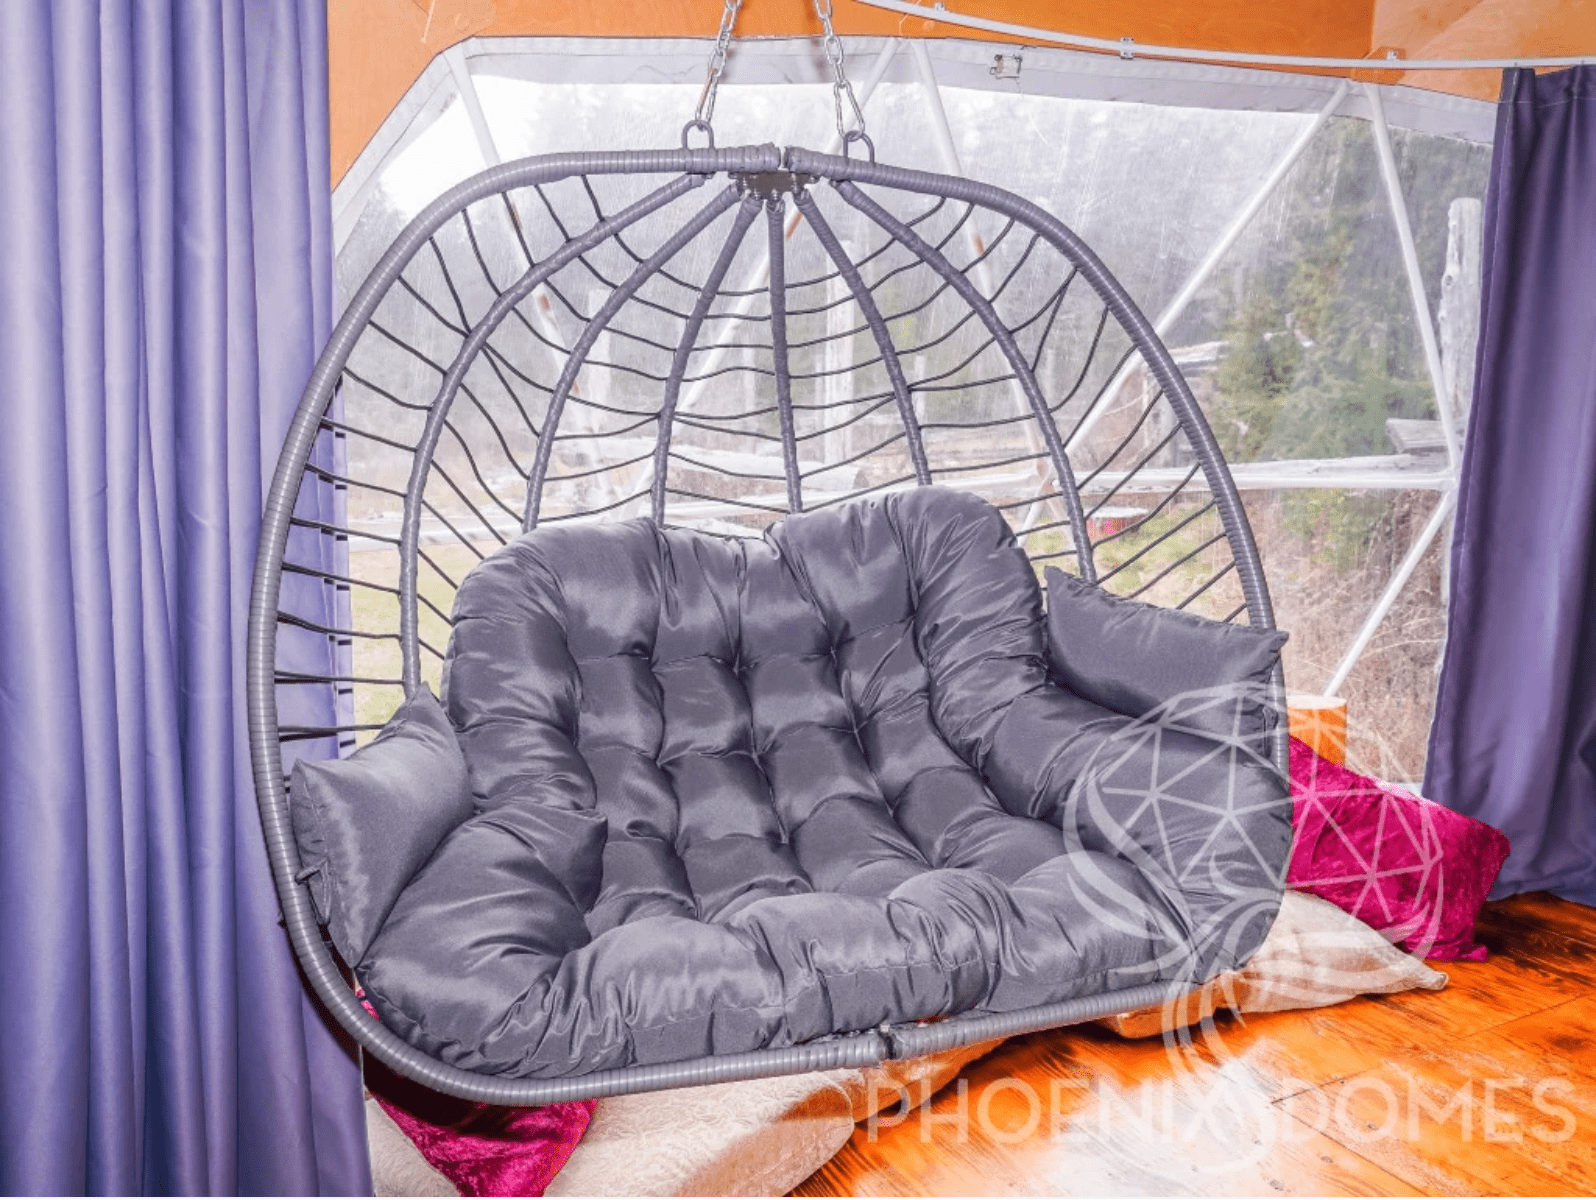 PHOENIX DOMES Basket Chair - Dark Grey - Double Hanging Chair for Phoenix Domes Geodesic Dome